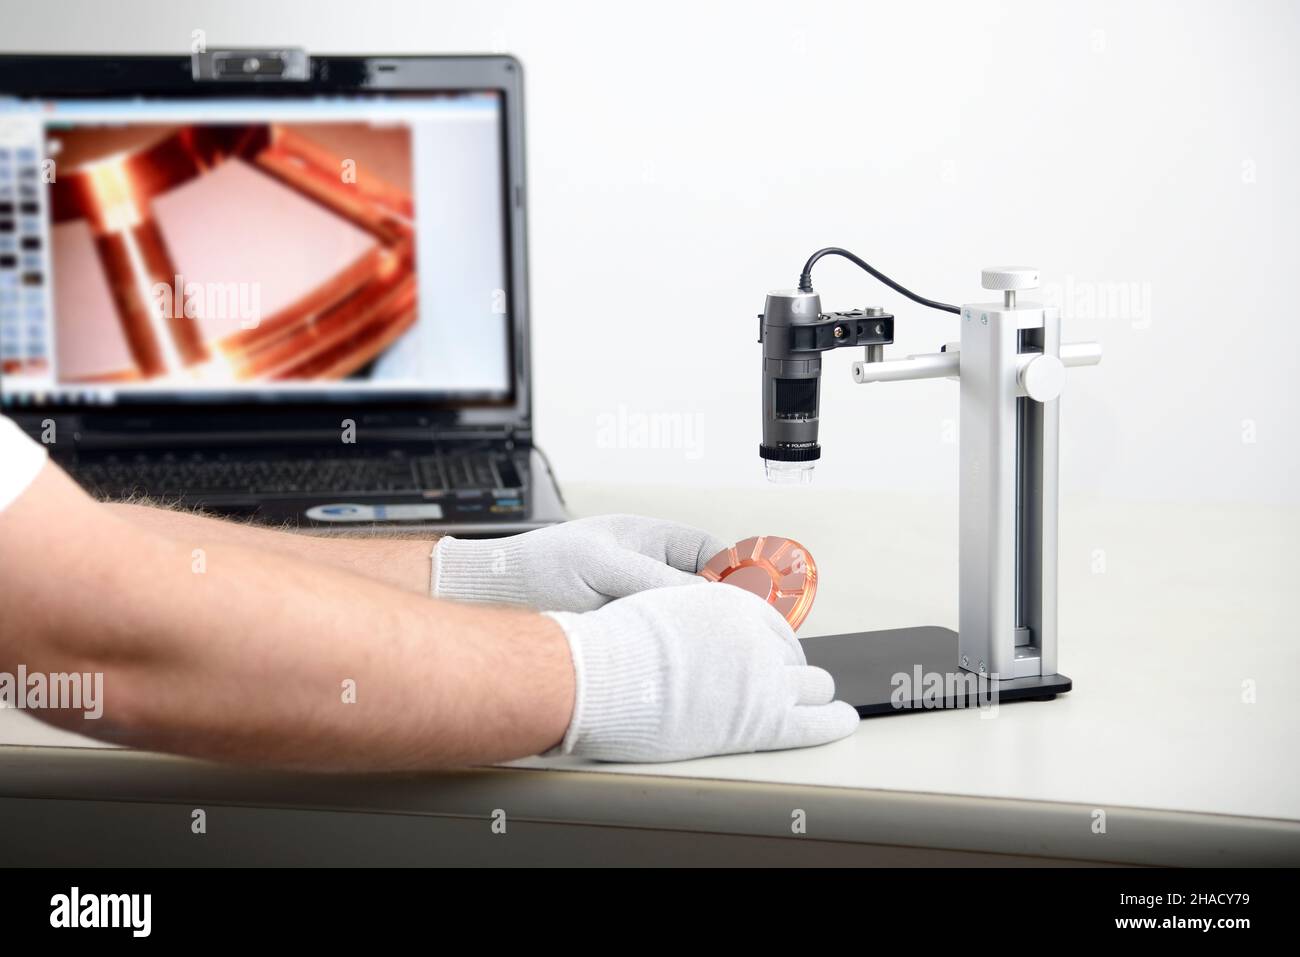 Electronic microscope with pc, concept of scientific research and new technologies Stock Photo